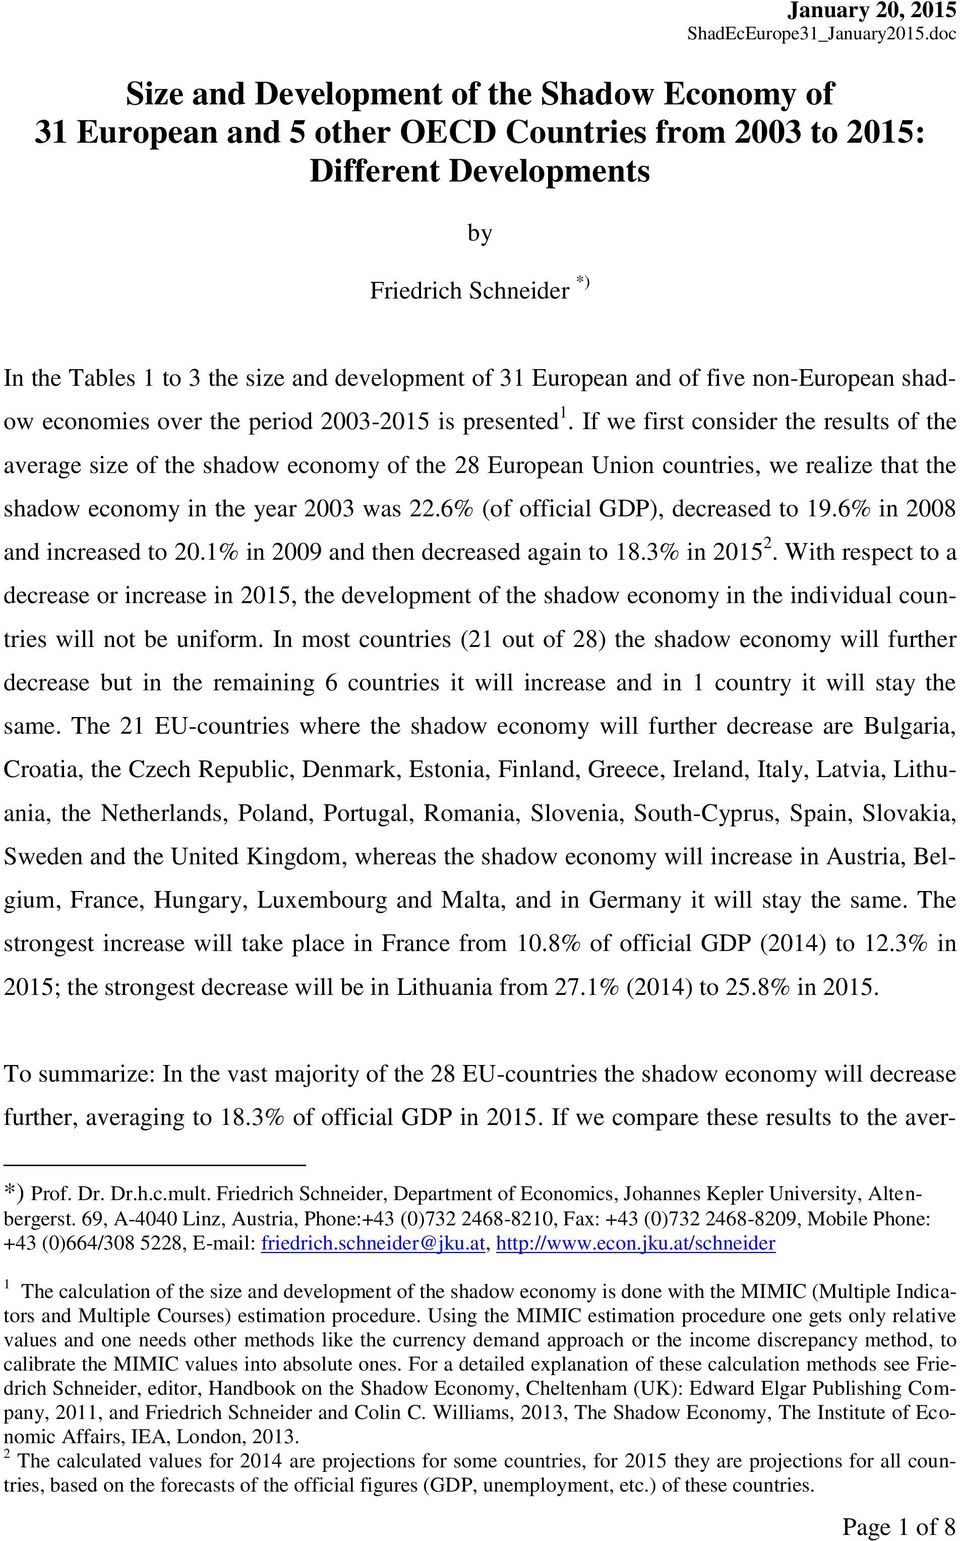 development of 31 European and of five non-european shadow economies over the period 2003-2015 is presented 1.